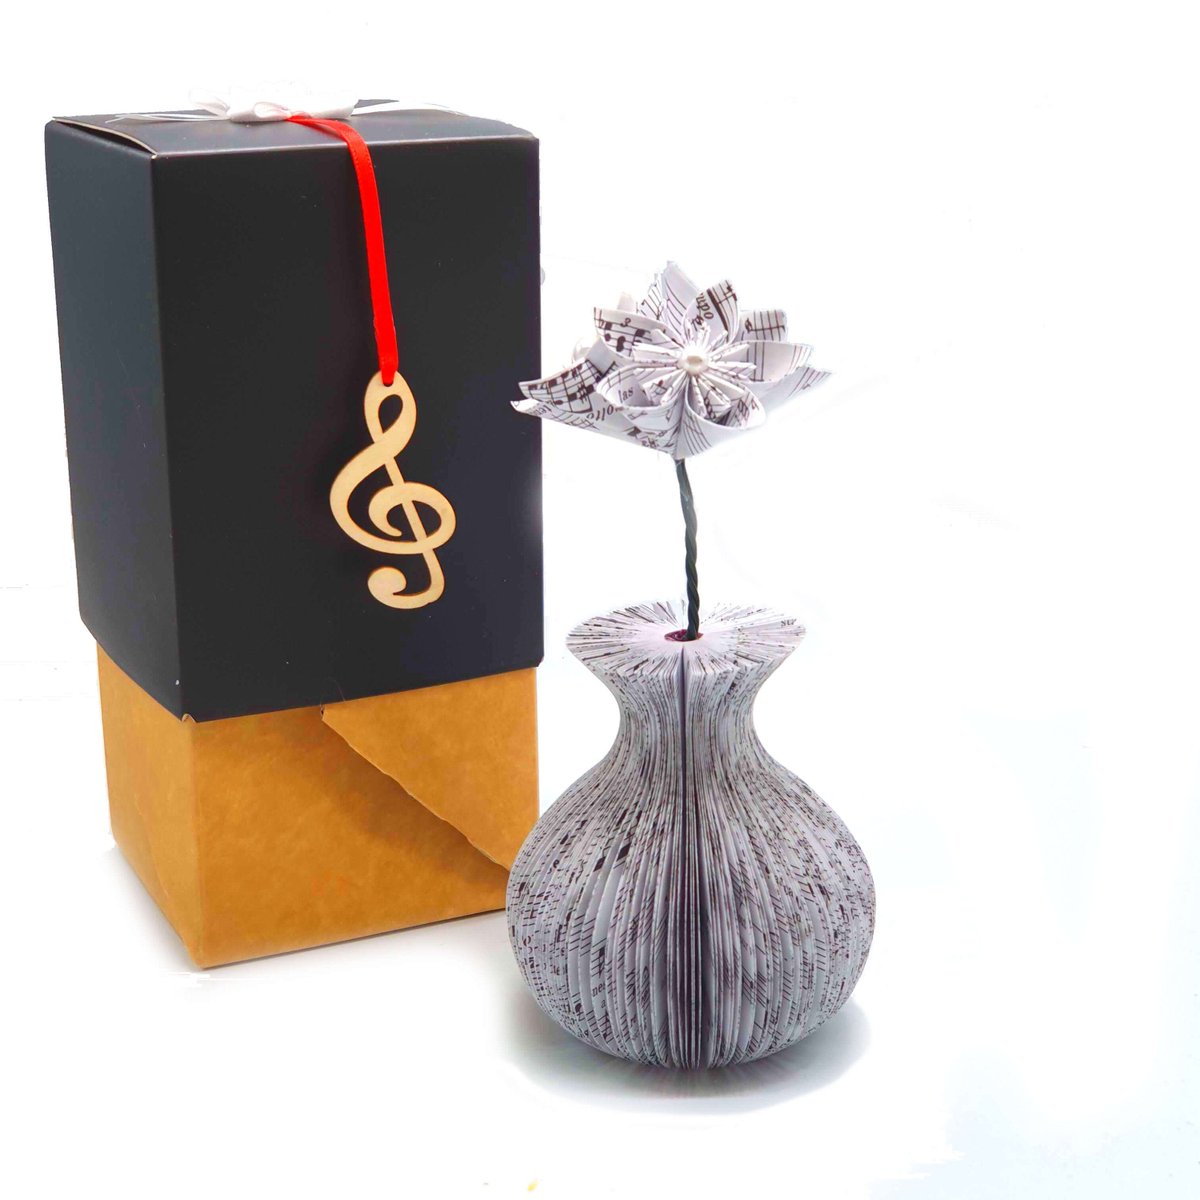 Music Vase and Flowers Book Gift creatoncrafts.com/products/music… #CreatonCrafts #mhhsbd #Shopify #PaperVase